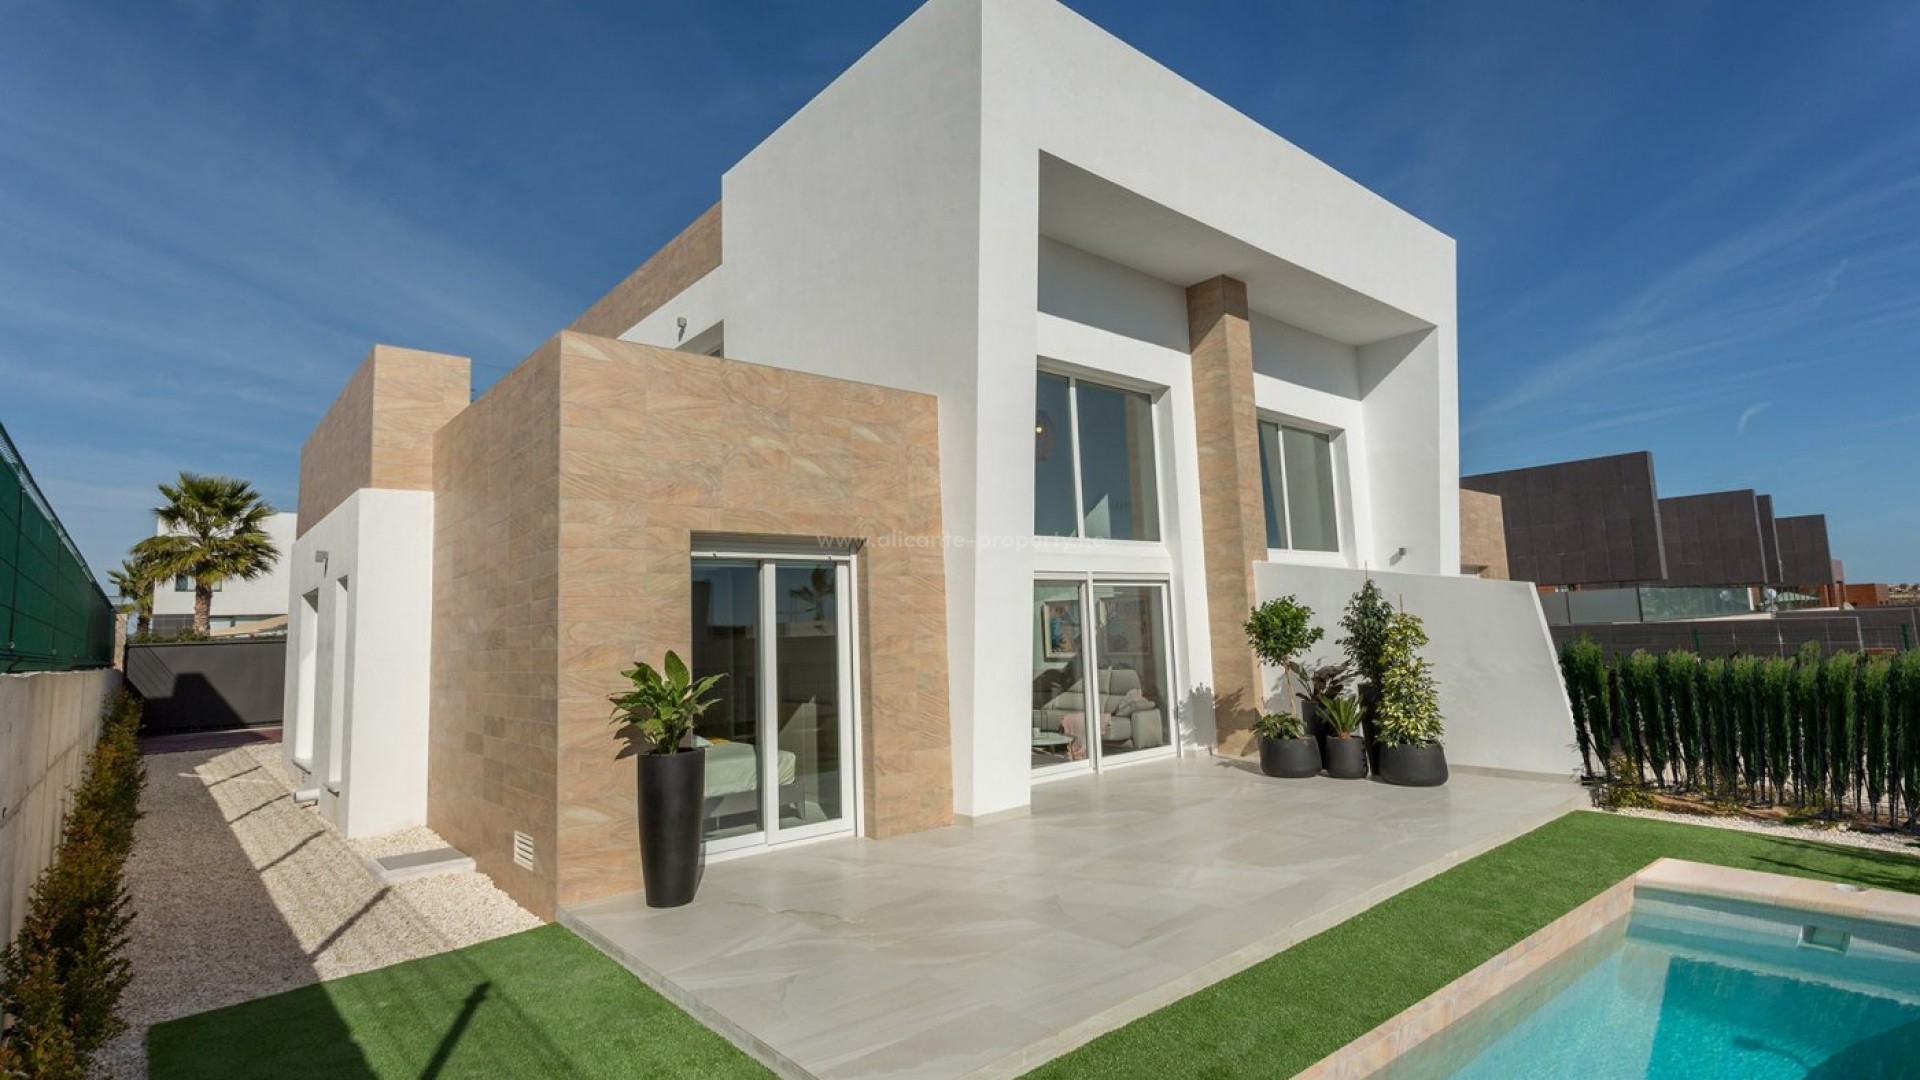 House/semi-detached house in Algorfa (La Finca Golf), 3 bedrooms, 2 bathrooms, garden with private pool, terrace, semi-finished basement, private parking